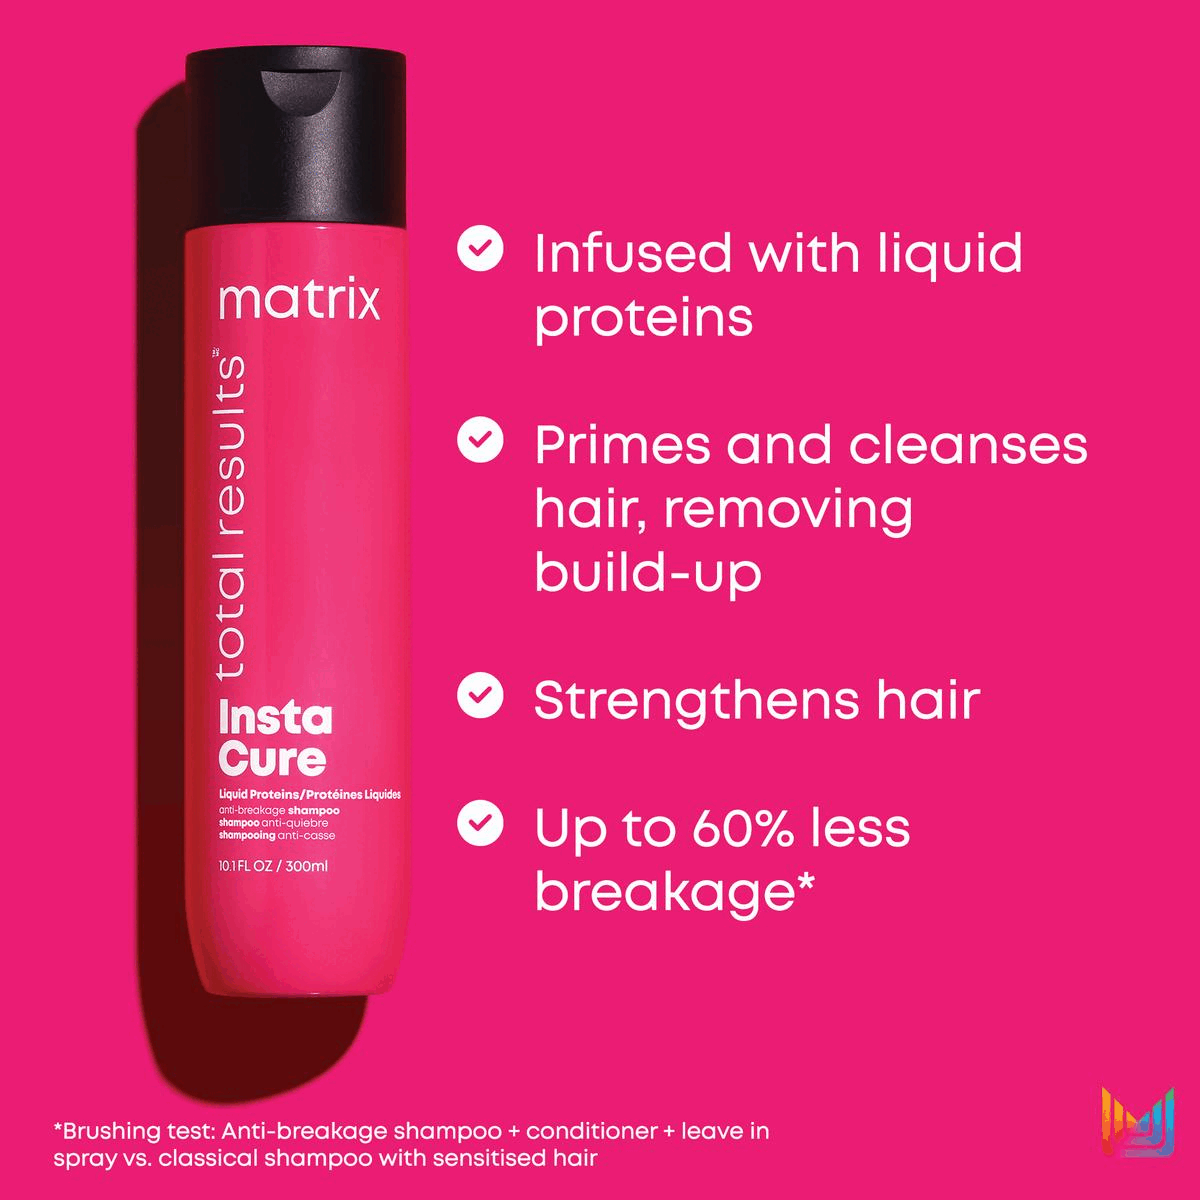 Image 1, Infused with liquid proteins, Primes and cleanses hair, removing build-up, Strengthens hair, Up to 60% less breakage* *Brushing test: Anti-breakage shampoo + conditioner + leave in spray vs. classical shampoo with sensitised hair Image 2, Infused with liquid proteins, Strengthens and softens hair, Detangles, Up to 60% less breakage**Brushing test: Anti-breakage shampoo + conditioner + leave in spray vs. classical shampoo with sensitised hair Image 3, Stylists Favourite Trusted by hairdressers to repair strength in damaged, dry and brittle hair, for up to 60% less breakage** Brushing test: when using anti-breakage shampoo, conditioner and leave in spray Vs. classical shampoo with sensitised hair. Image 4, Before After Instacure Anti-breakage Haircare System**Brushing test: when using anti-breakage shampoo, conditioner and leave in spray Vs. classical shampoo with sensitised hair.Image 5, Before After Instacure Anti-breakage Haircare System**Brushing test: when using anti-breakage shampoo, conditioner and leave in spray Vs. classical shampoo with sensitised hair. Image 6, Instacure Anti-breakage professional haircare system with up to 60% less breakage* Cleanse Soften Target Porosity, Shampoo, Conditioner, Porosity Spray *Brushing test: Anti-breakage shampoo + conditioner + leave-in spray vs. classical shampoo with sensitised hair